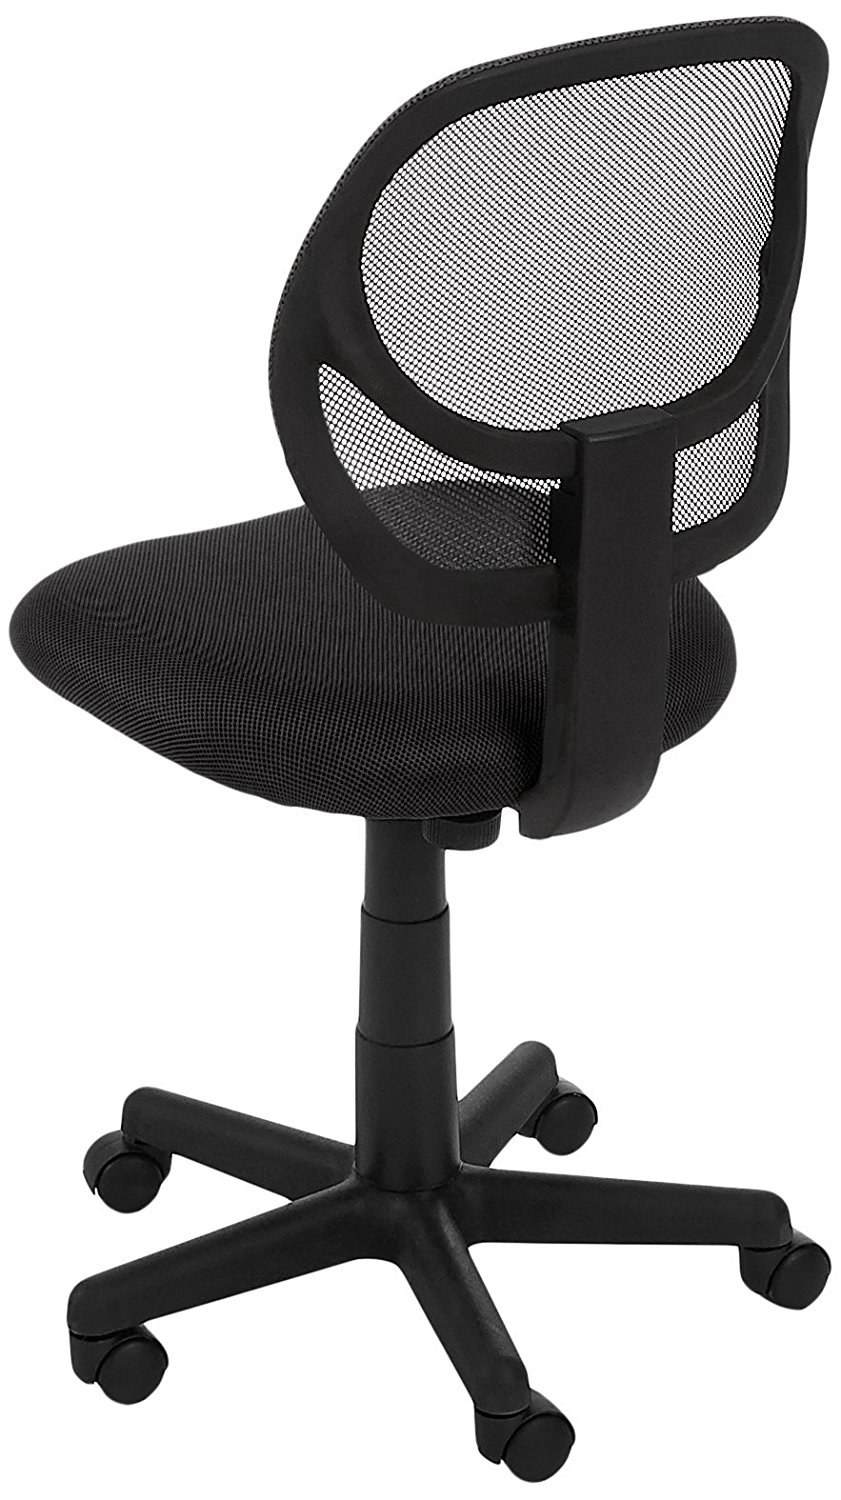 Costume Highest Rated Desk Chair On Amazon for Streamer